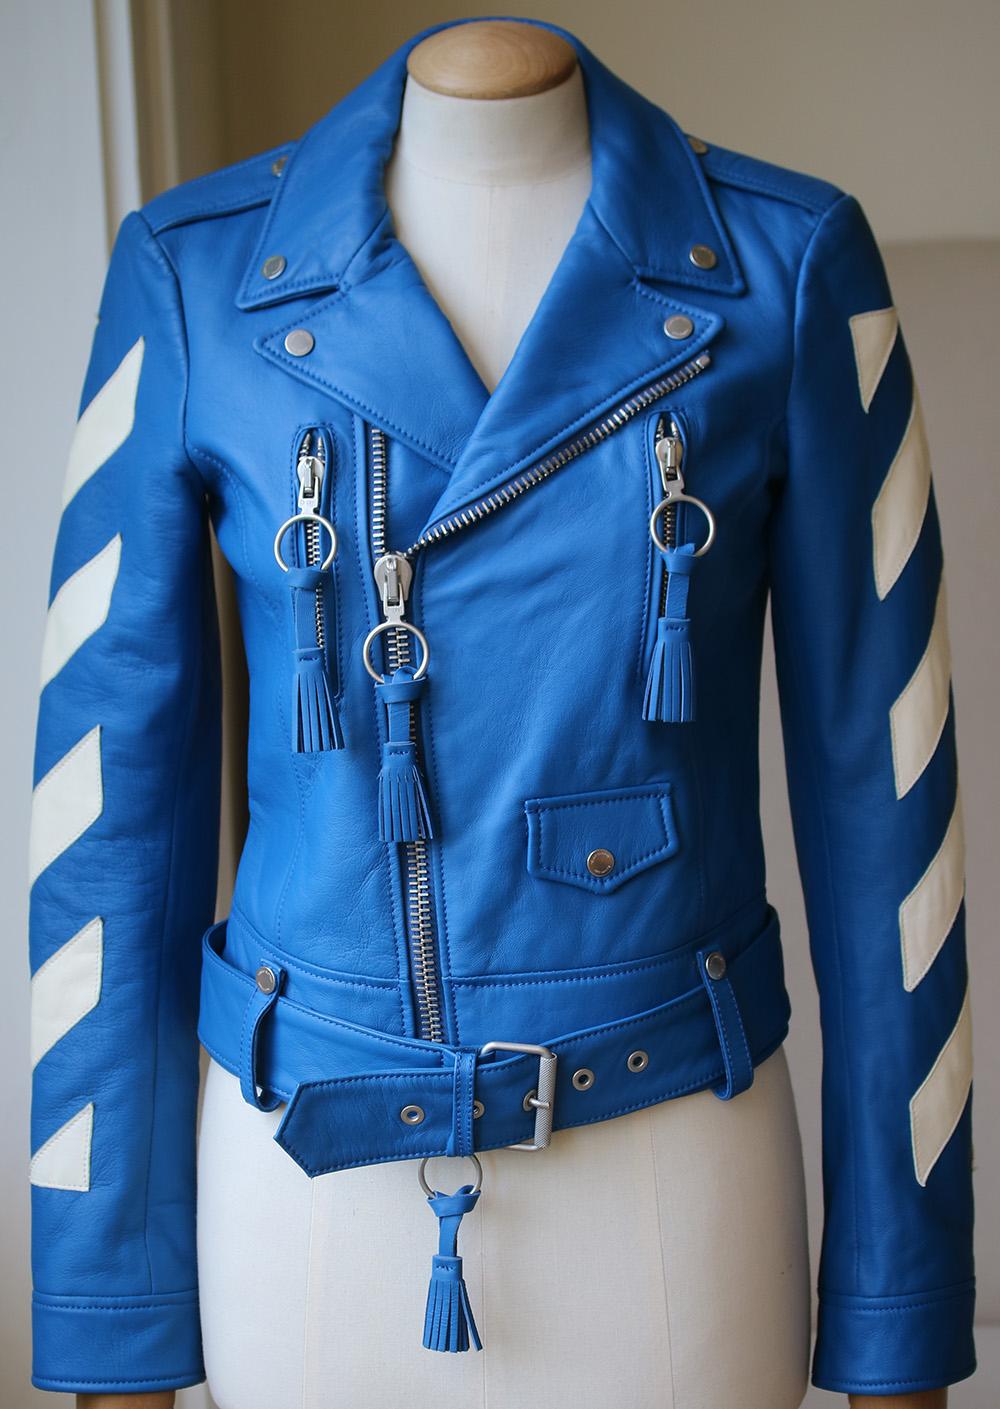 Virgil Abloh - also Kanye West's Creative Director - creates pieces inspired by youth culture and streetwear for his cult brand Off-White. Immaculately crafted from supple blue leather, this biker jacket features signature diagonal striping and the